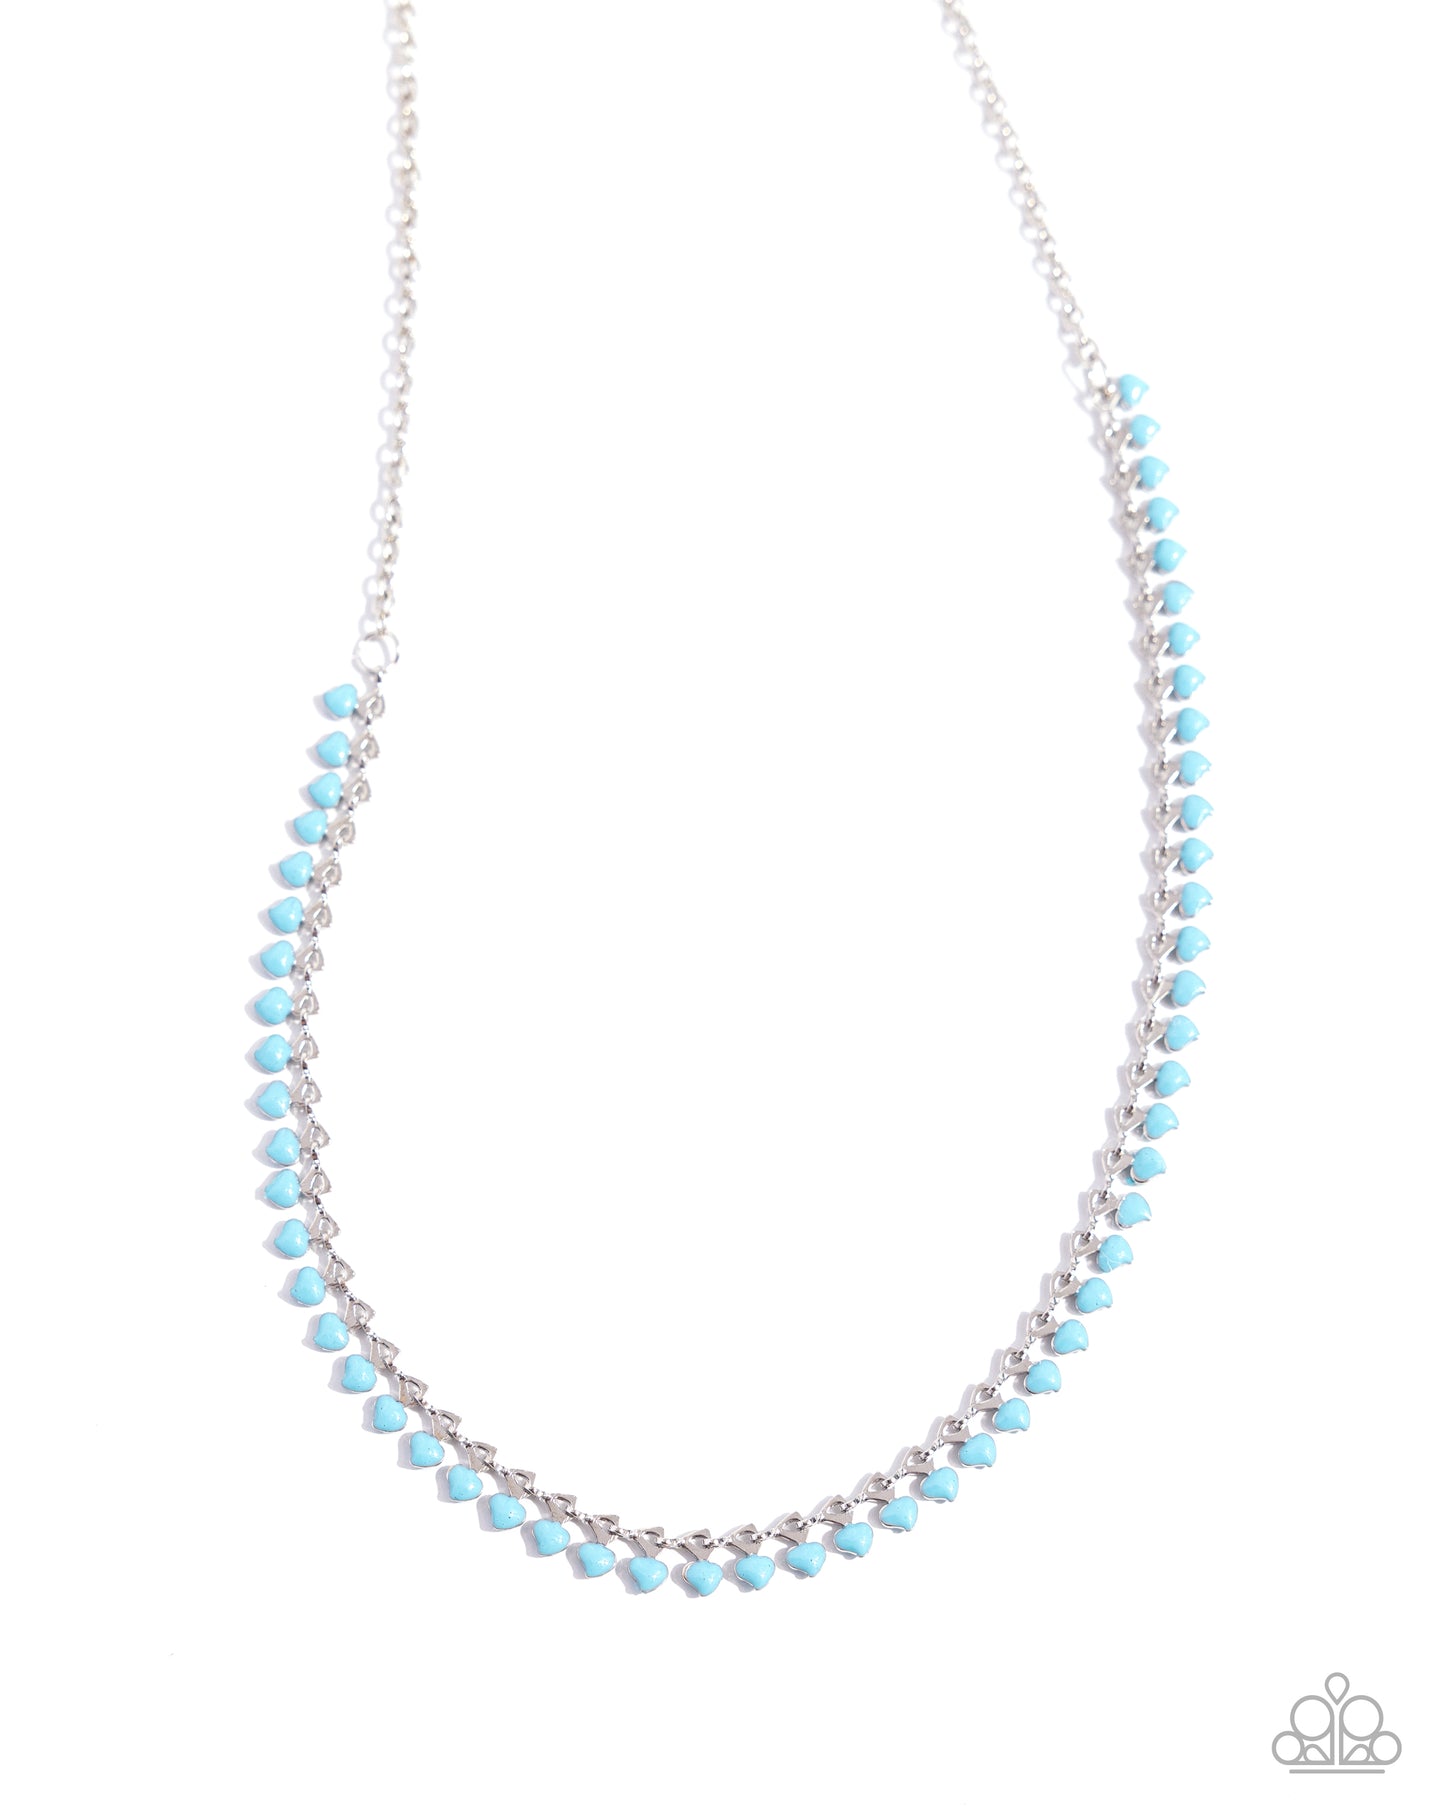 Colored Cadence - blue - Paparazzi necklace